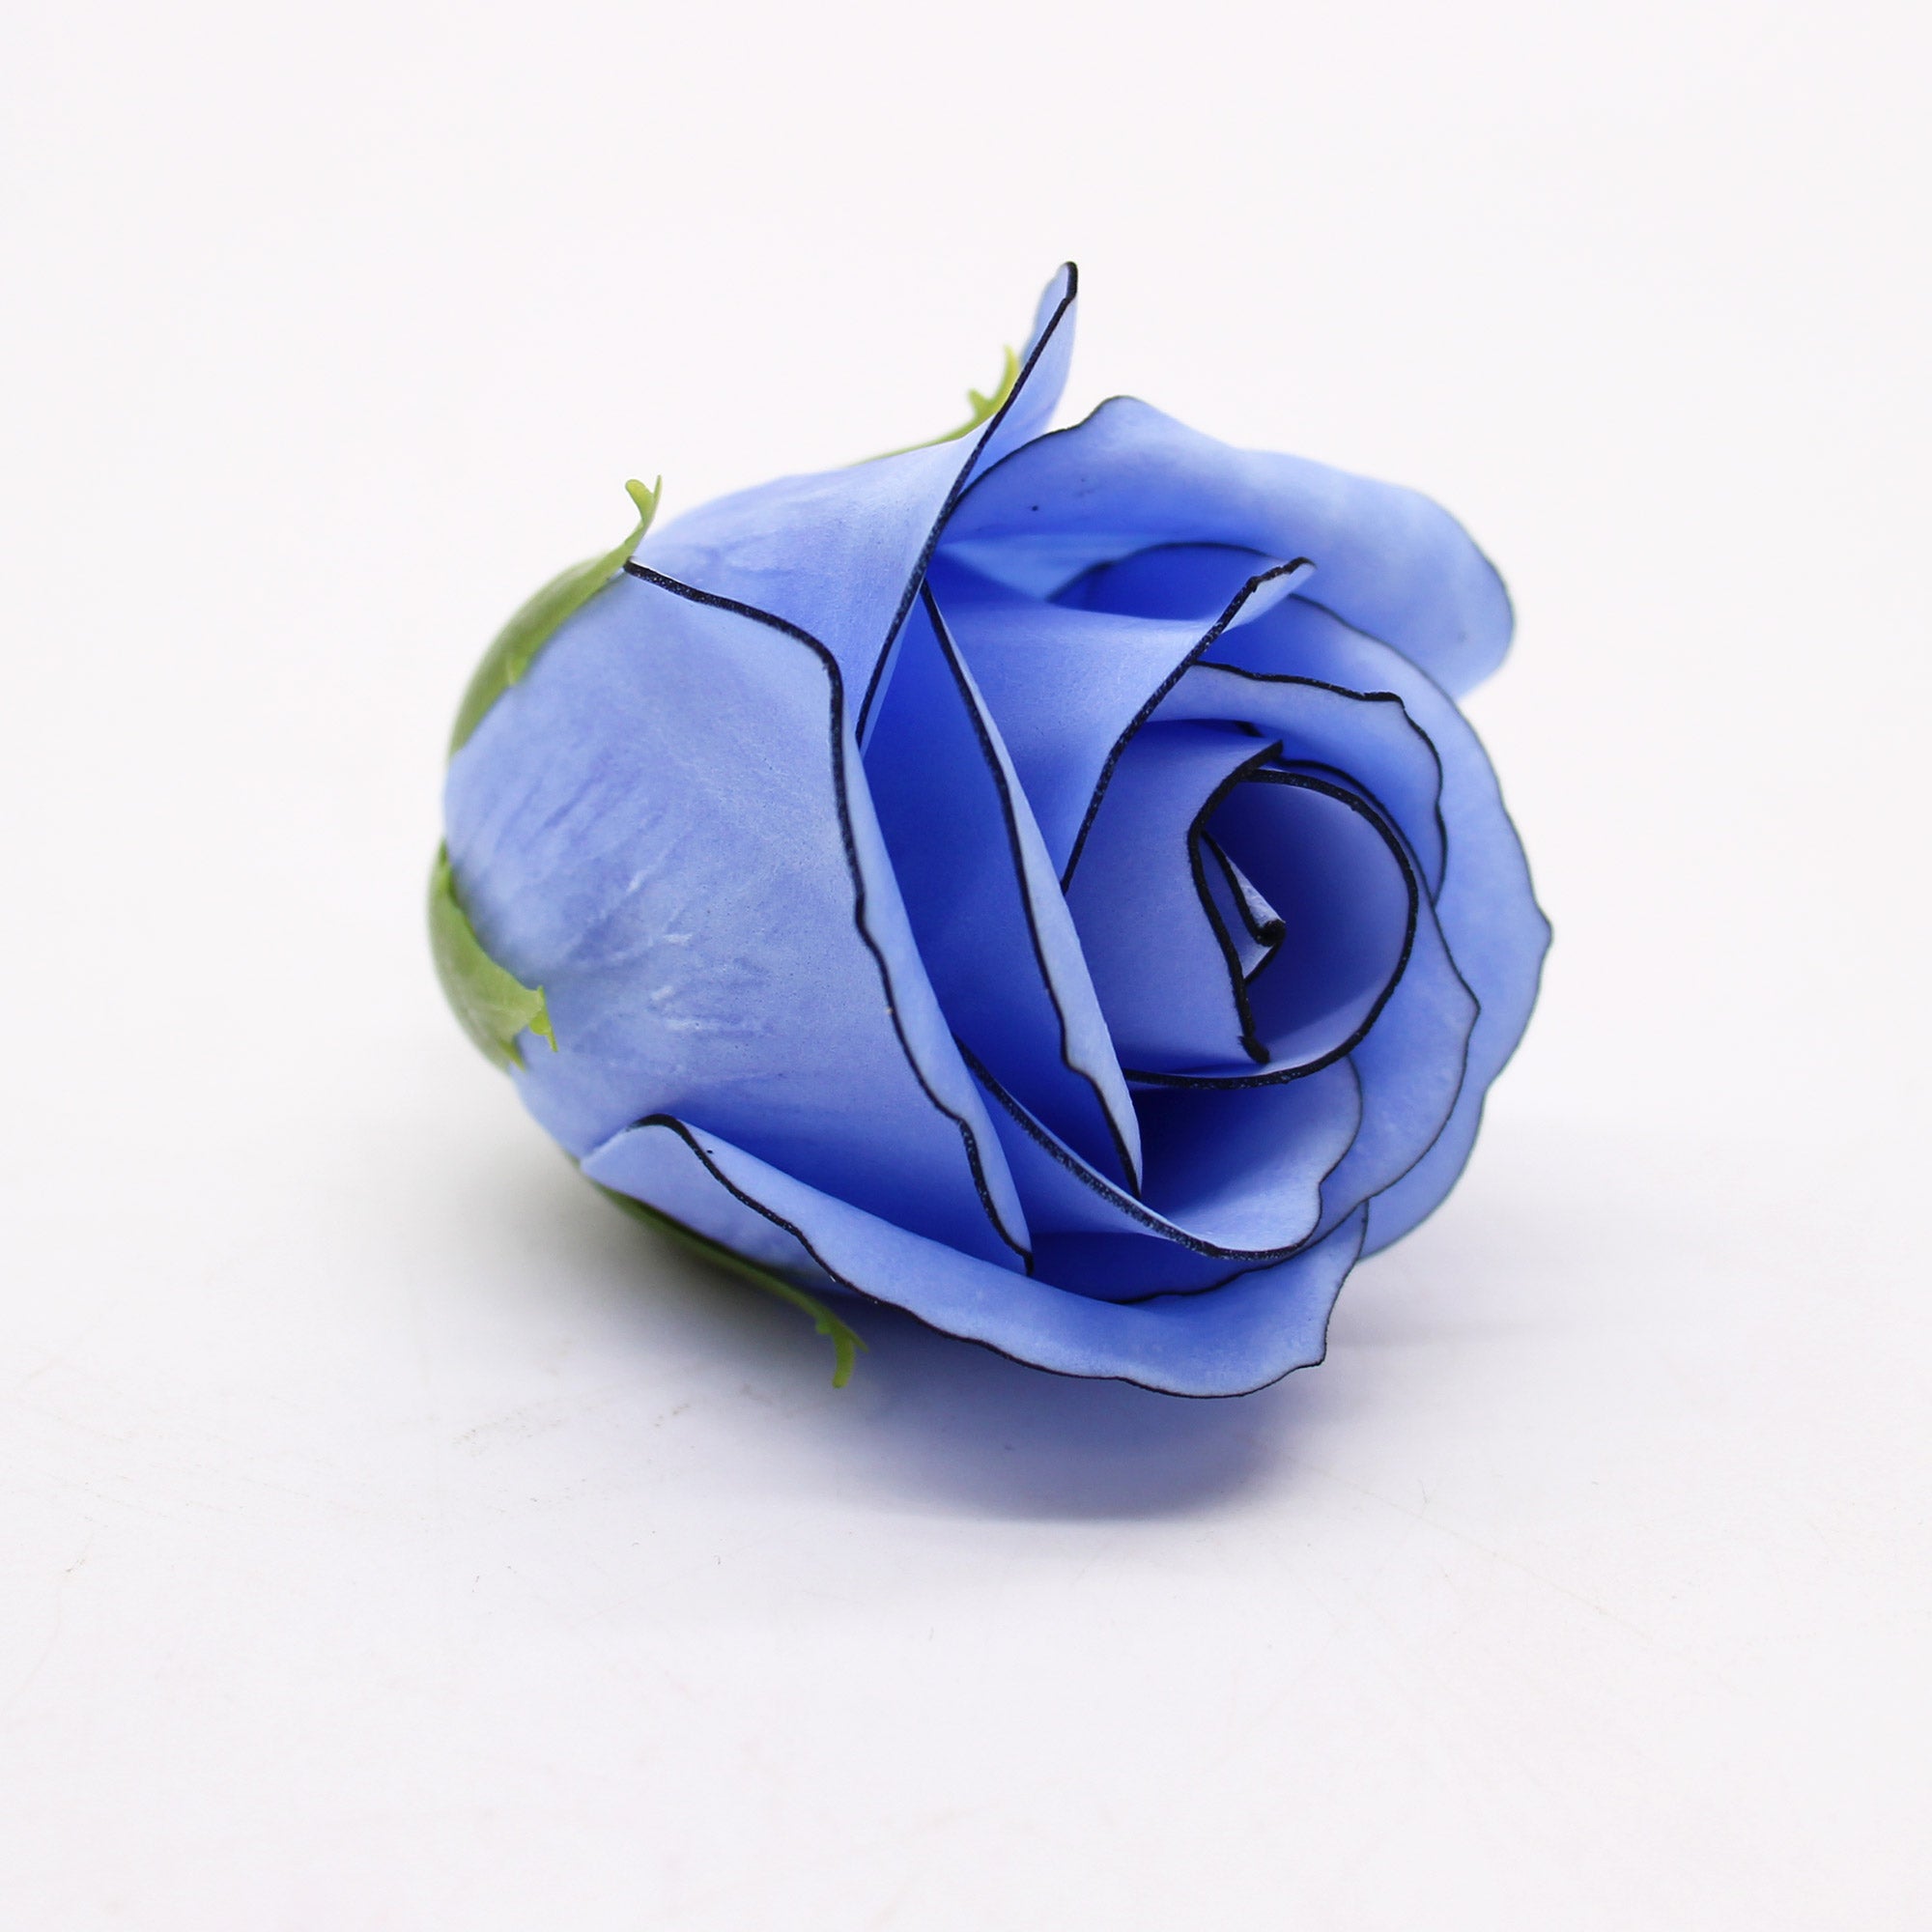 View Craft Soap Flowers Med Rose Blue With Black Rim x 10 pcs information